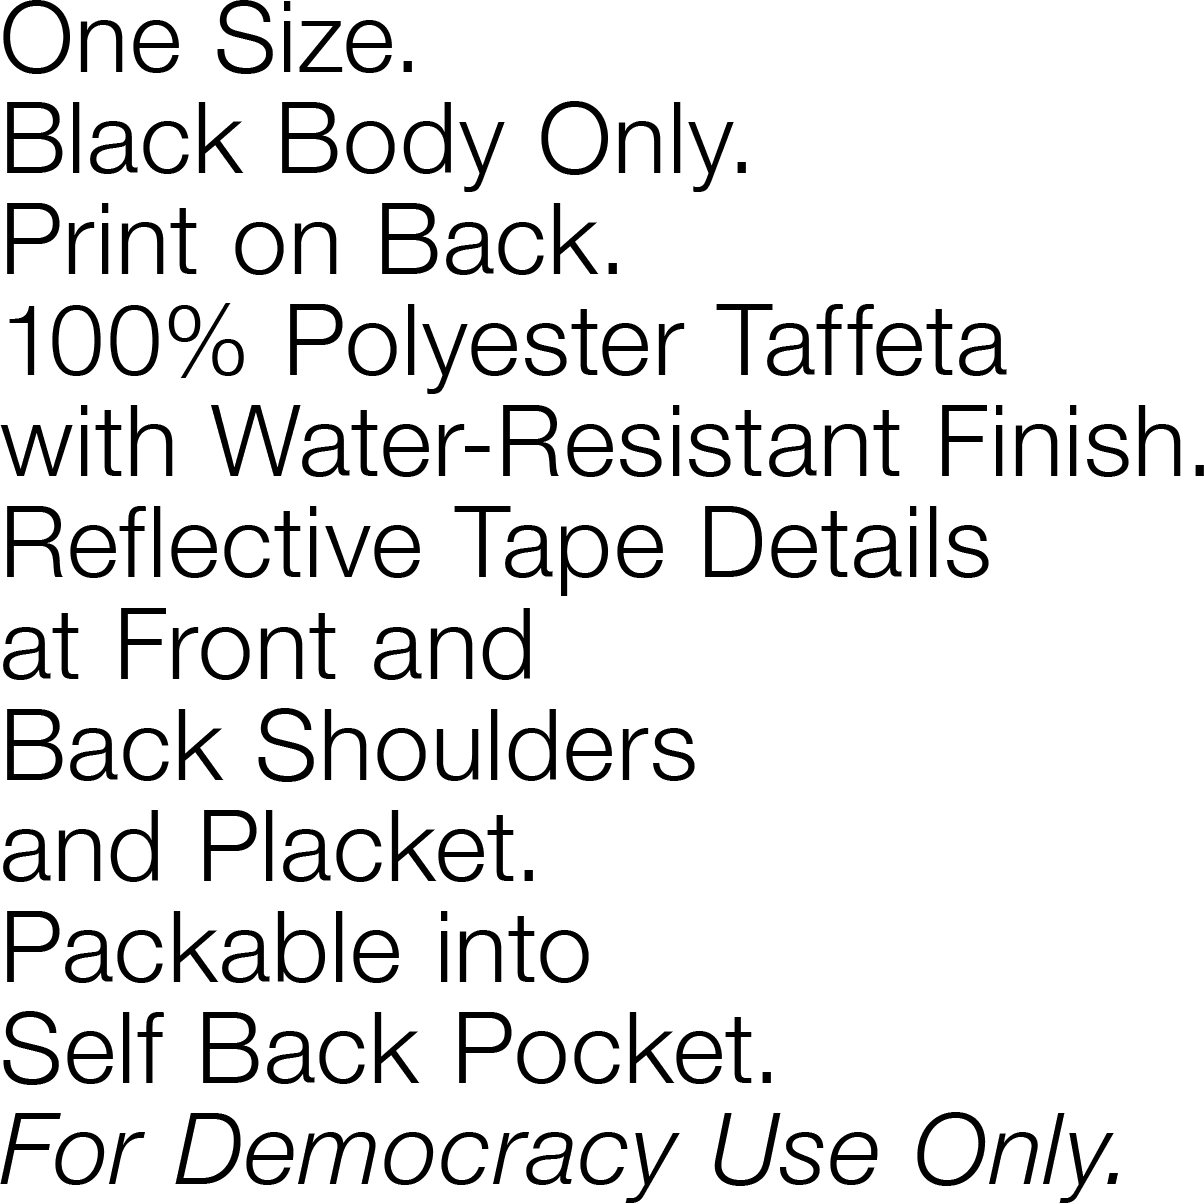 One Size. Black Body Only. Print on Back. 100% Polyester Taffeta with Water-Resistant Finish. Reflective Tape Details at Front and Back Shoulders and Placket. Packable into Self Back Pocket. For Democracy Use Only.